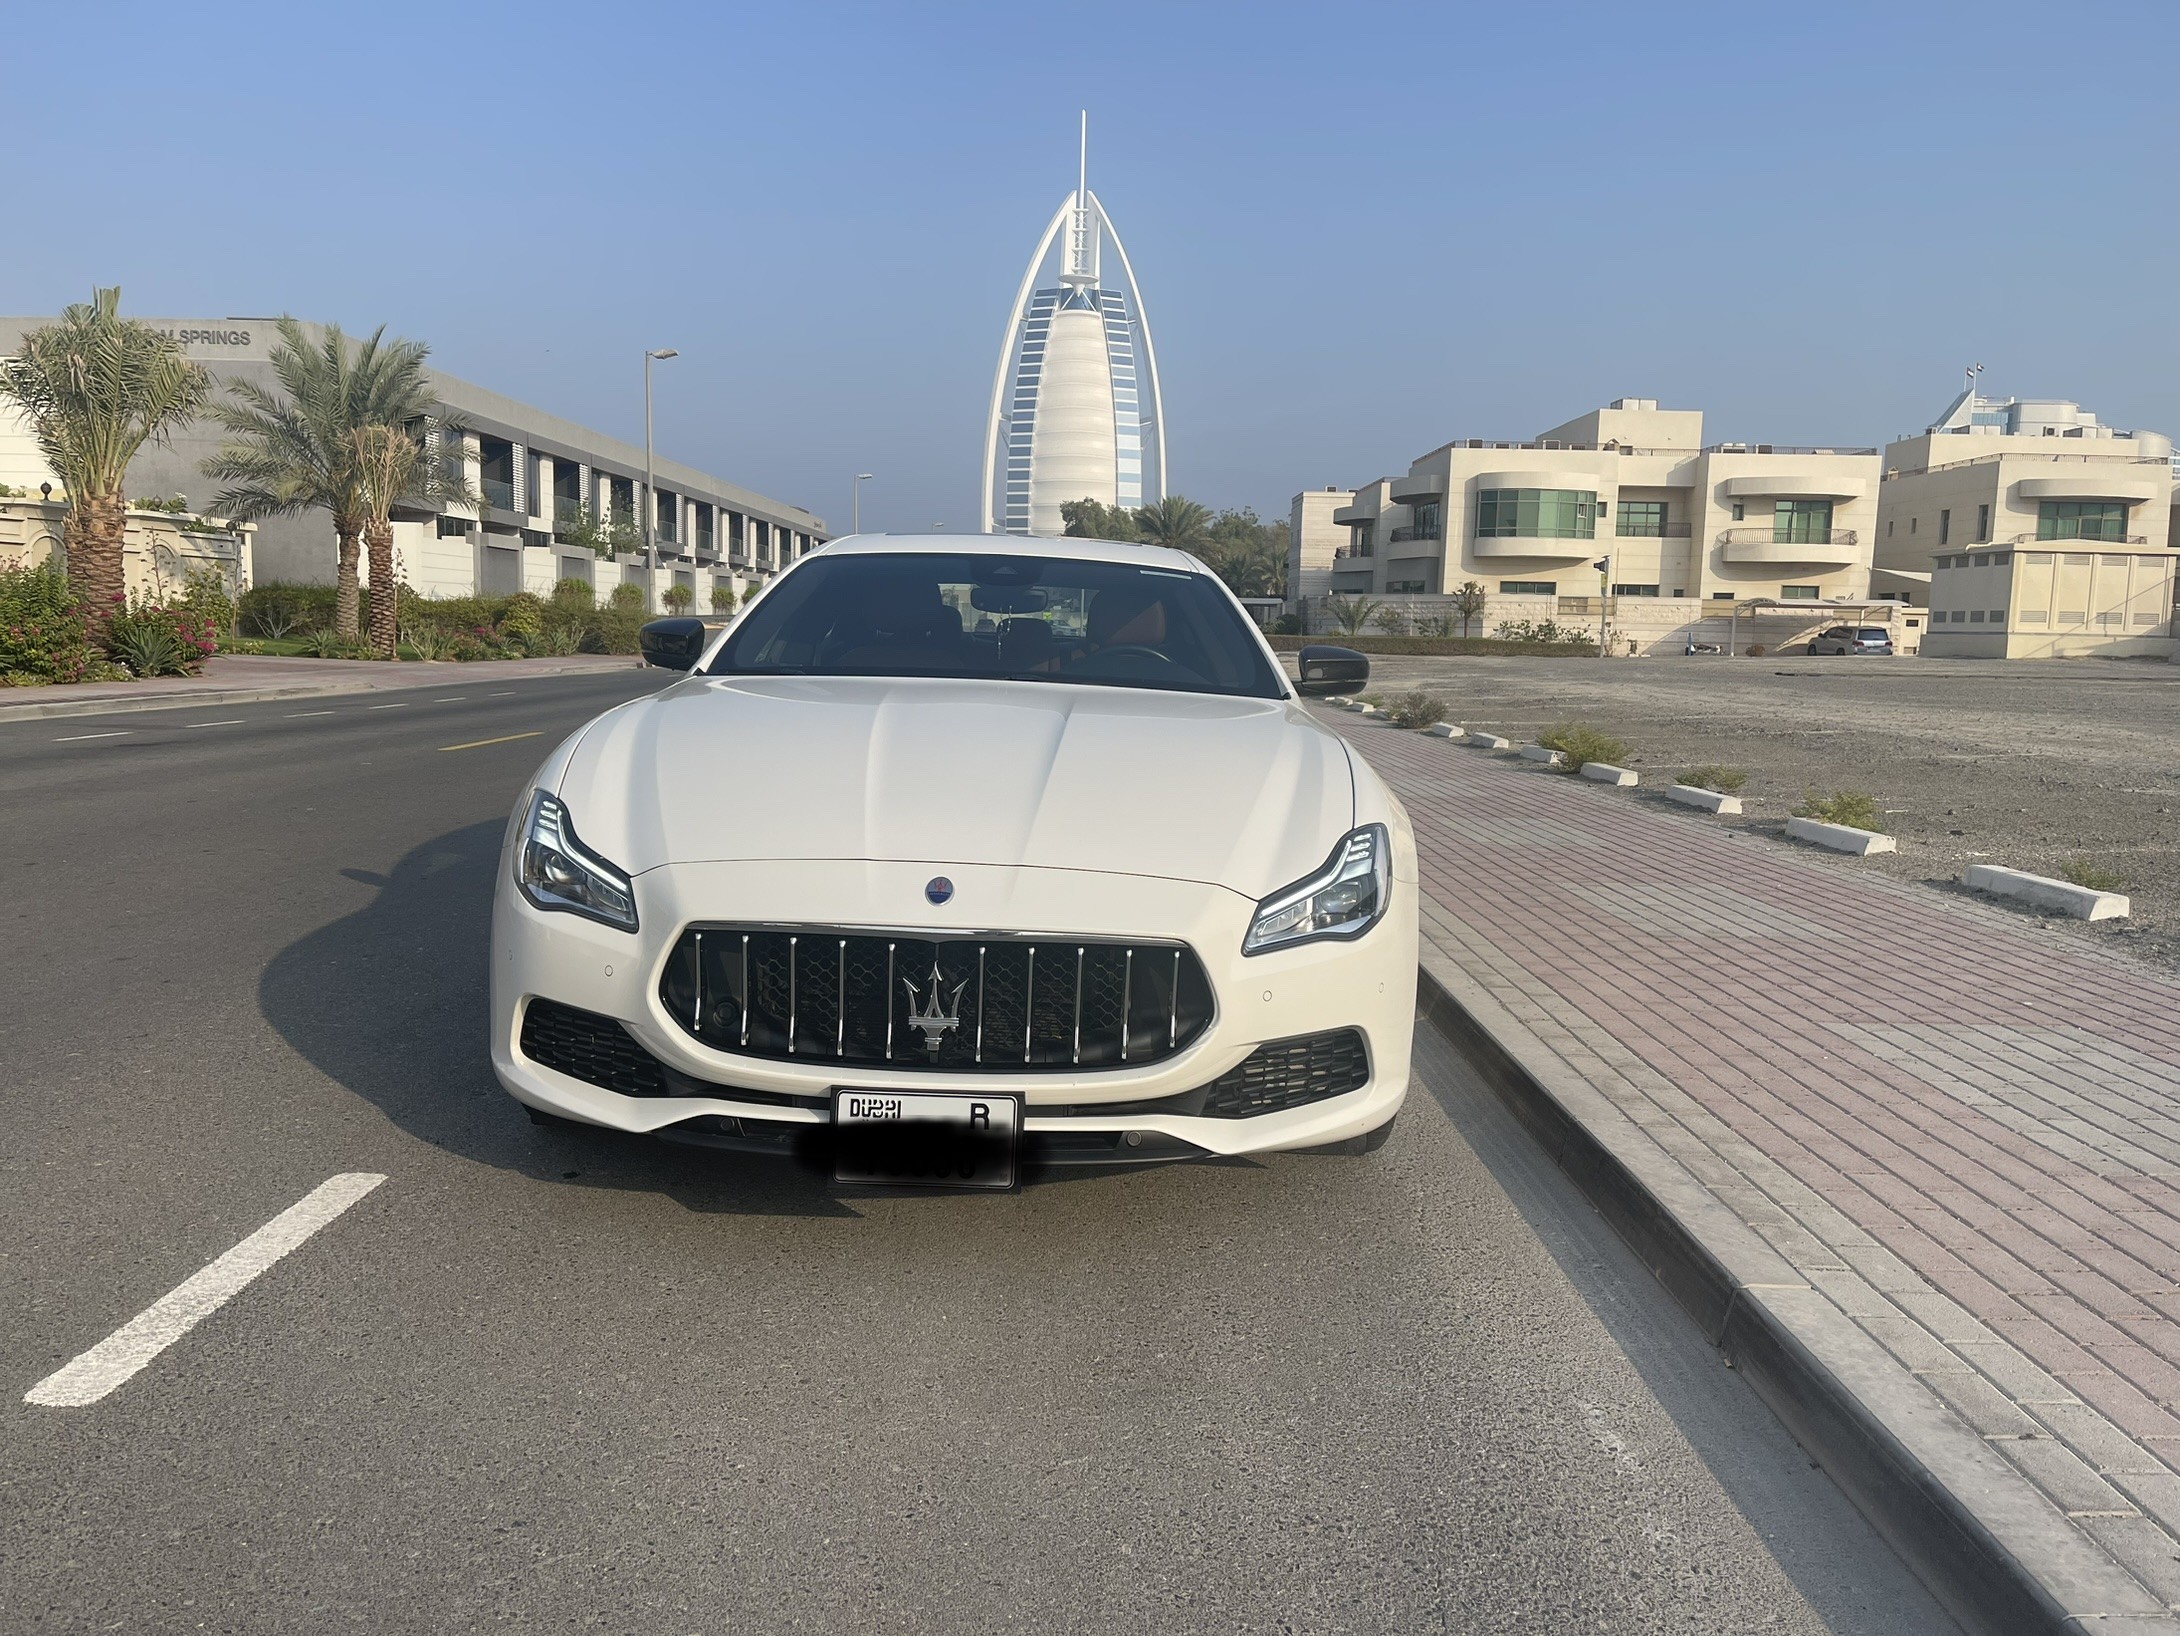 Luxury 2020 Maserati Quattroporte S with full manufacturer maintainance and warranty until Oct’ 2025-image